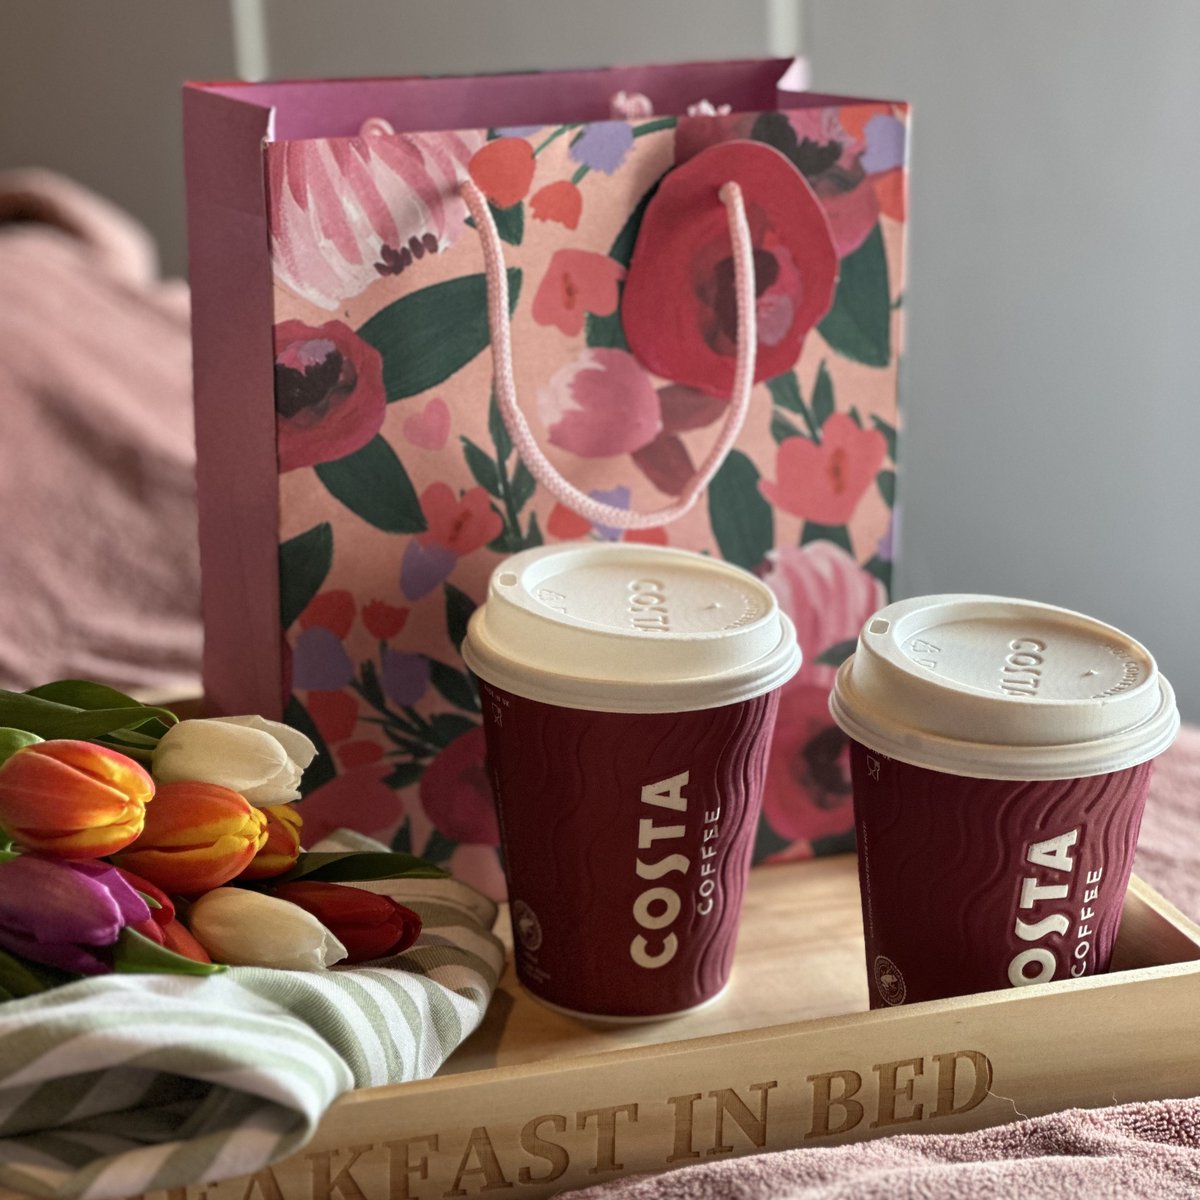 When great coffee can be delivered, there's no need to leave the house this Mother's Day. ❤️ ☕